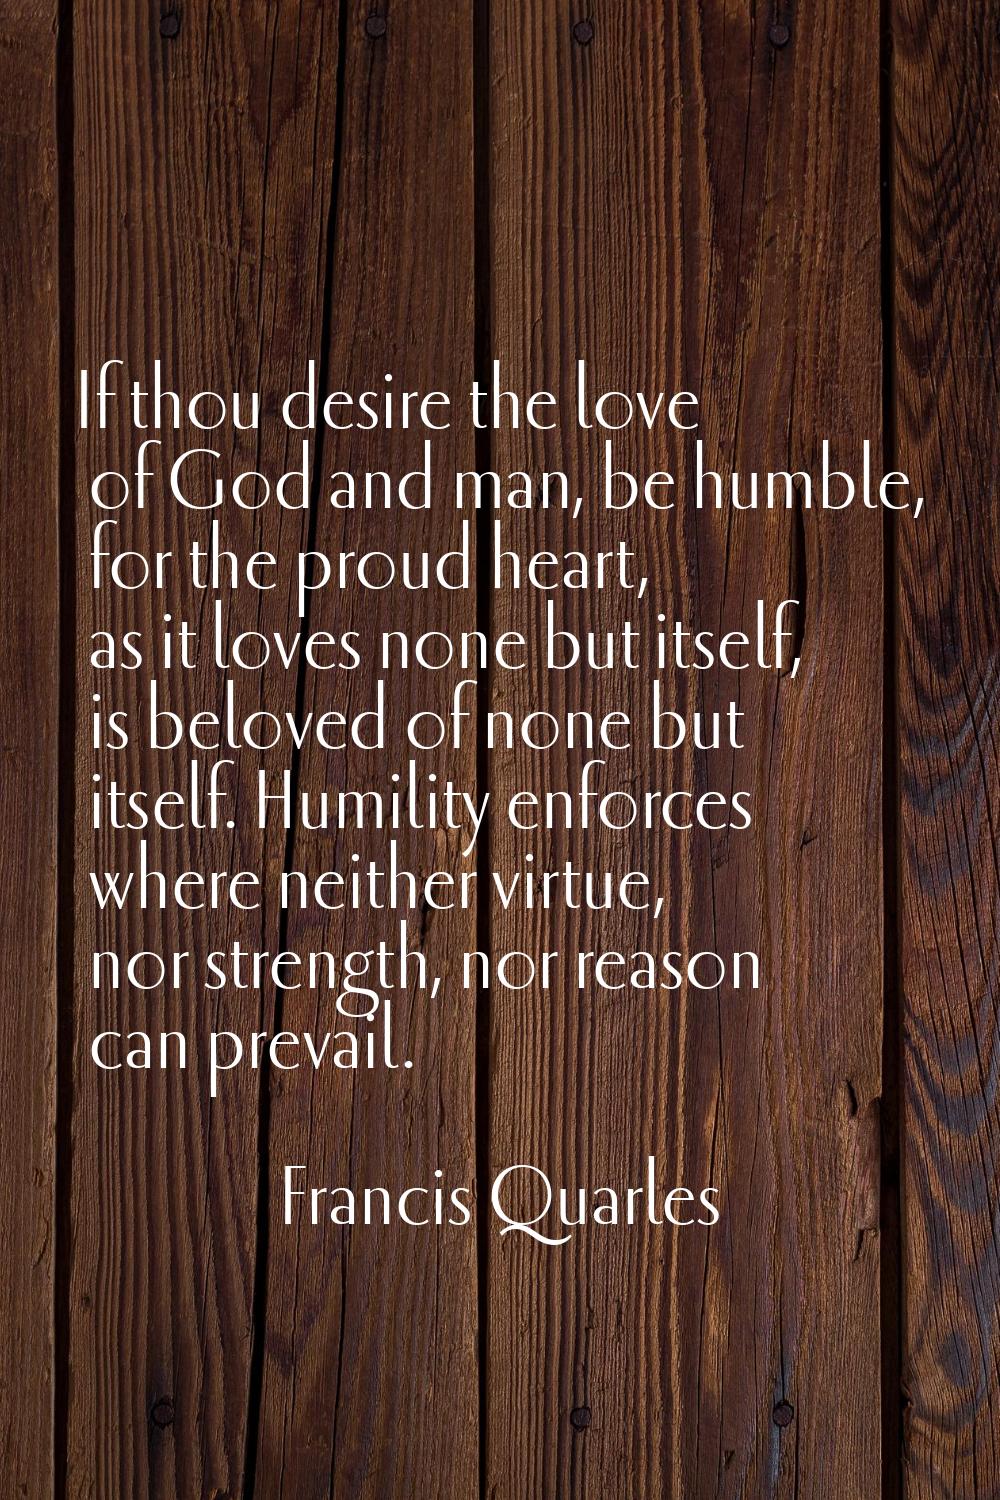 If thou desire the love of God and man, be humble, for the proud heart, as it loves none but itself